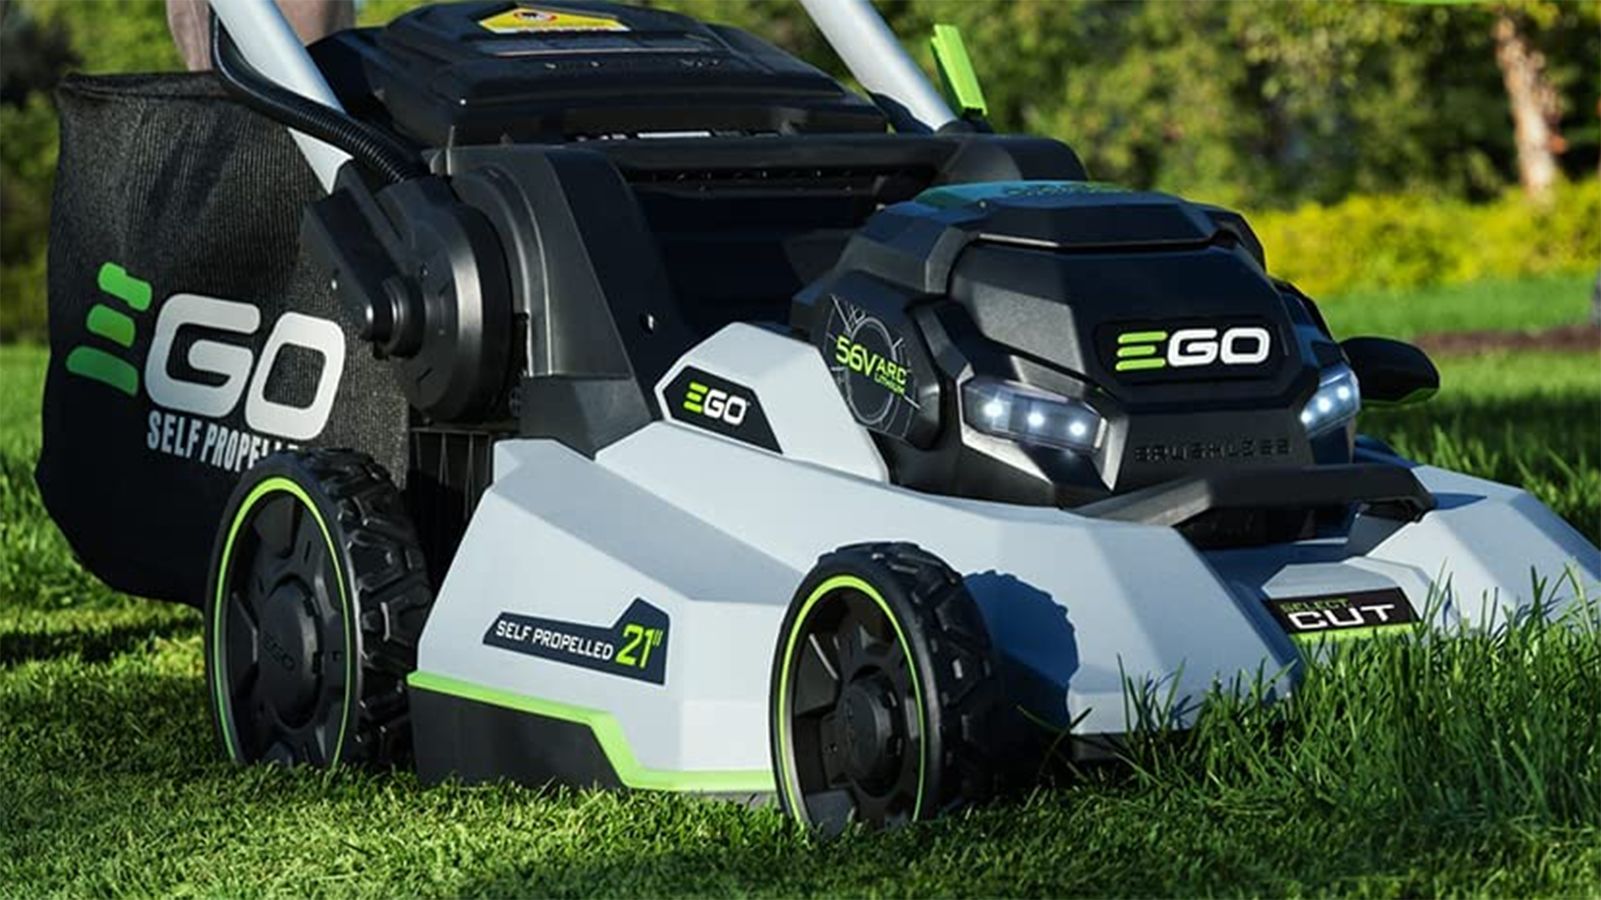 The Ego Power+ Lawn Mower is 23% off for spring Prime Day